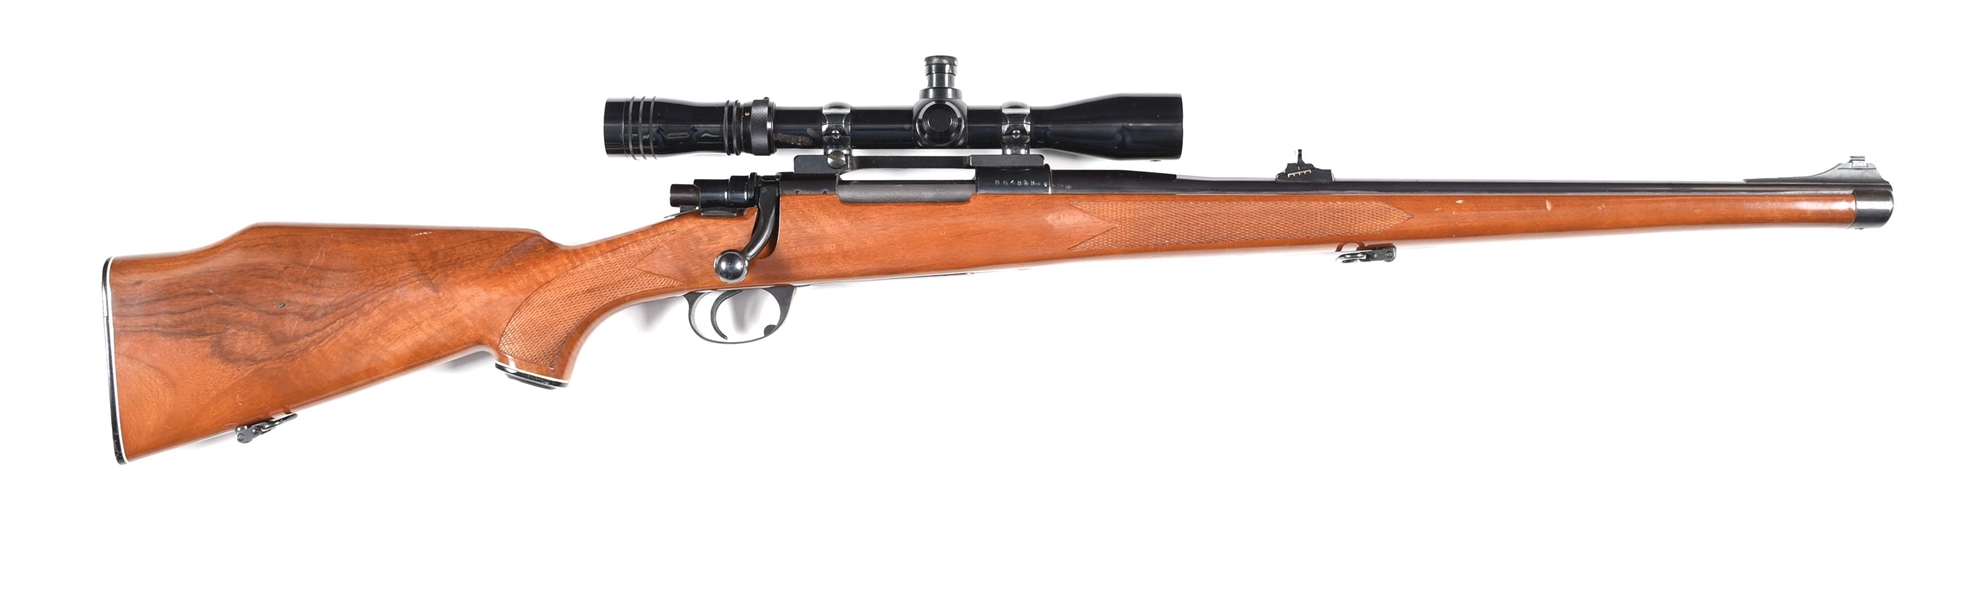 (M) INTERARMS MARK X BOLT ACTION RIFLE WITH SCOPE